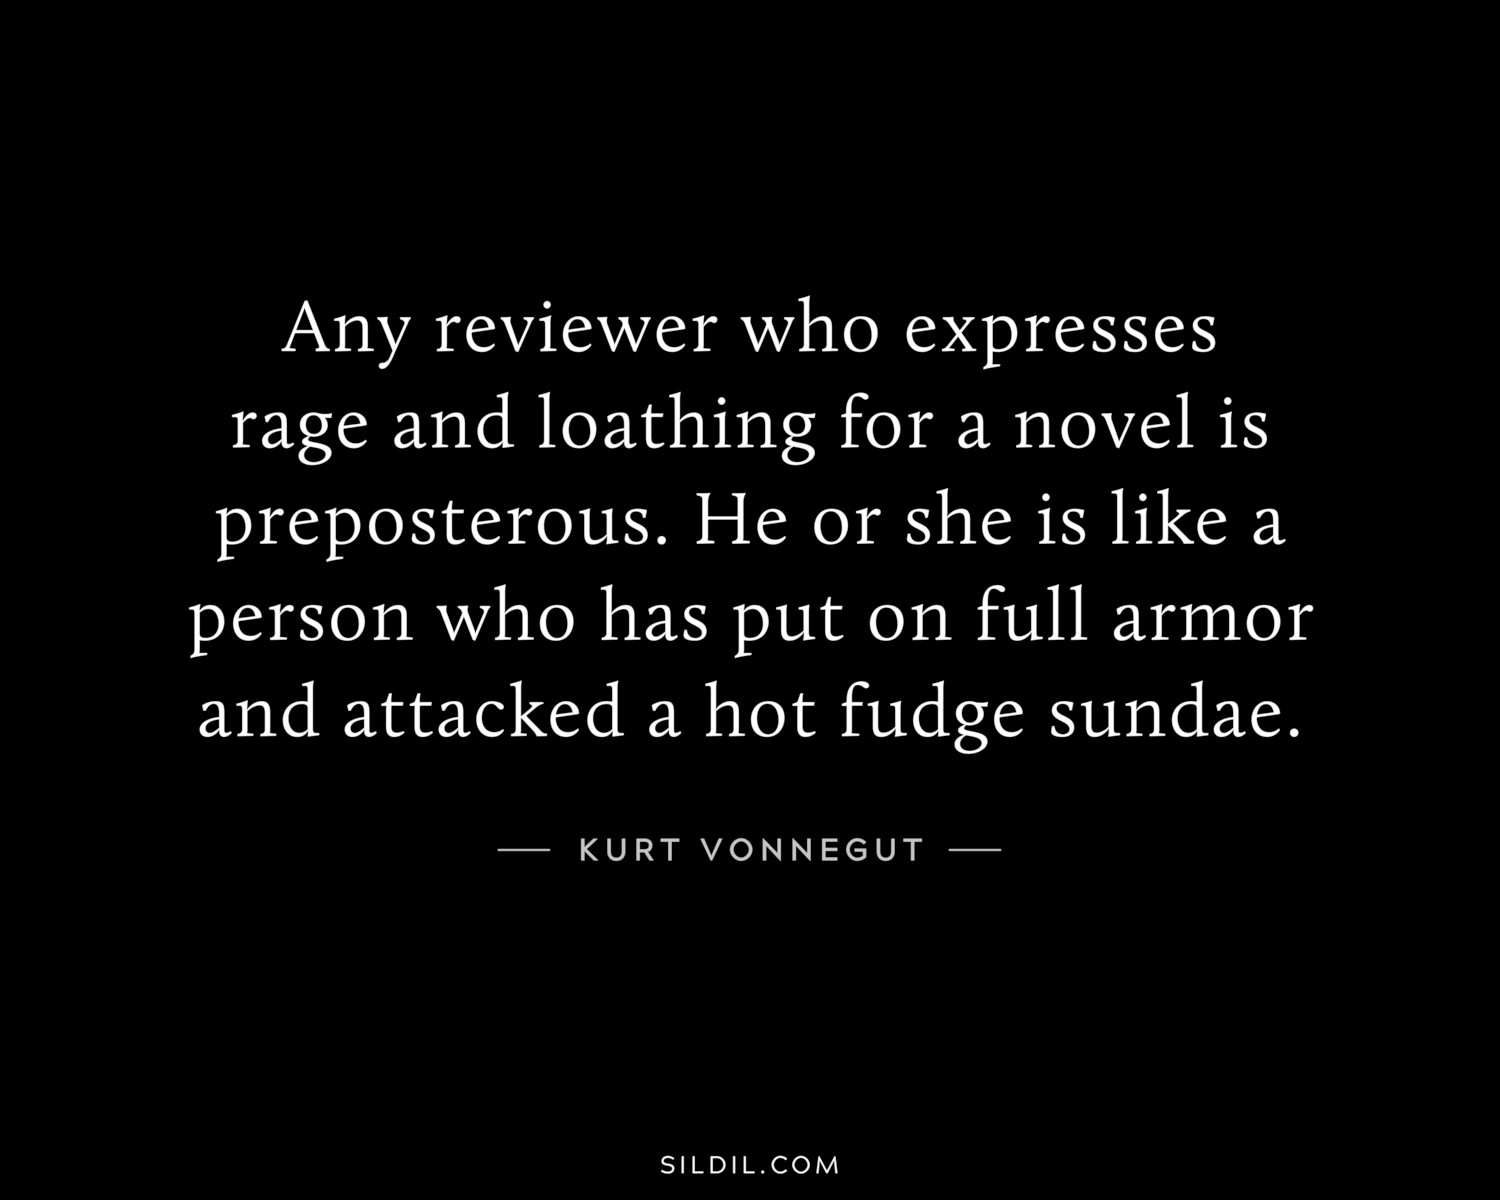 Any reviewer who expresses rage and loathing for a novel is preposterous. He or she is like a person who has put on full armor and attacked a hot fudge sundae.